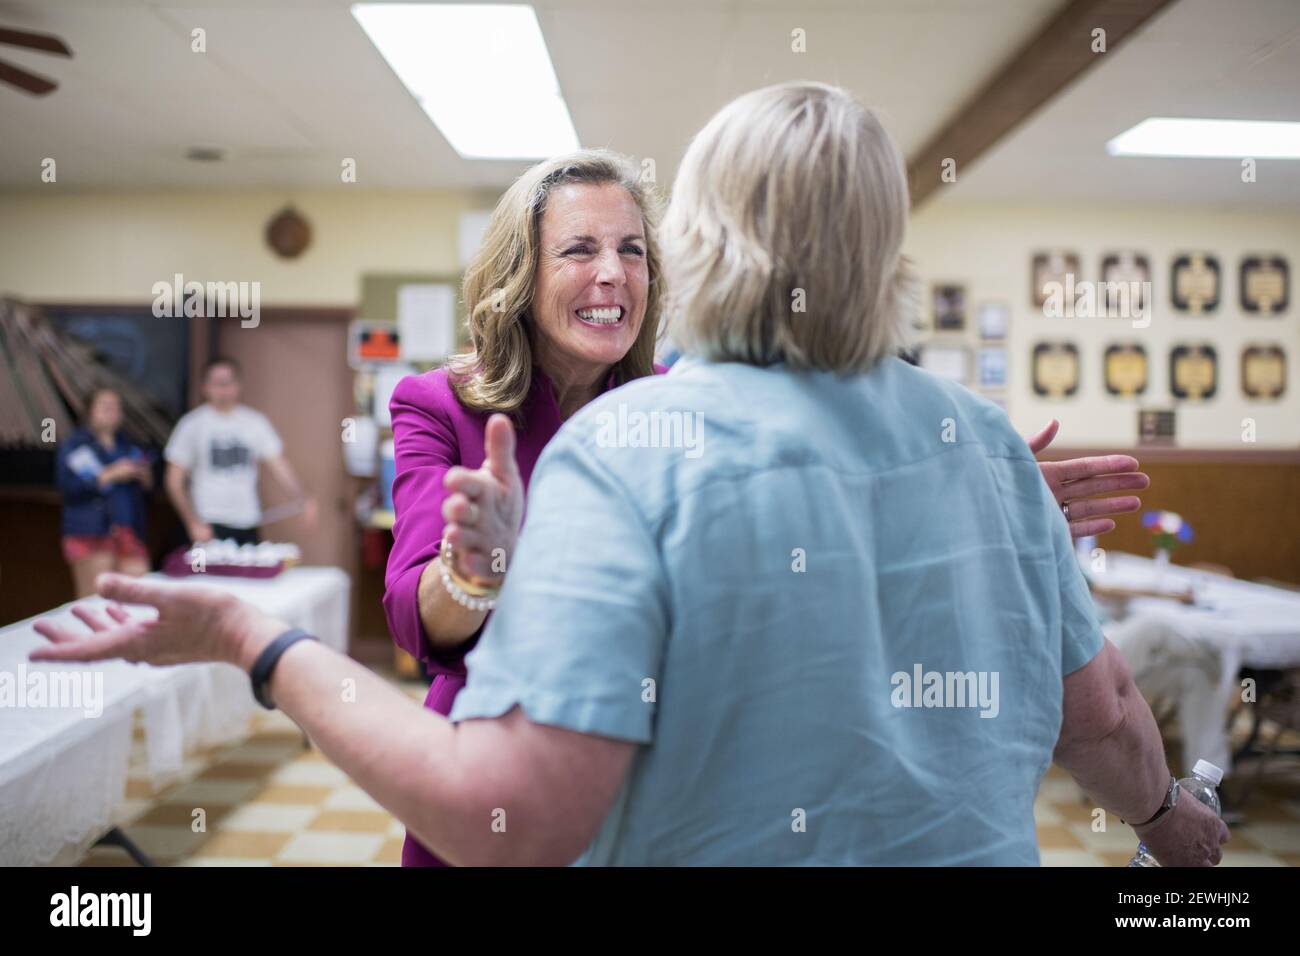 UNITED STATES - AUGUST 17: Katie McGinty, Democratic candidate for Pennsylvania Senate, talks with a guest during the Annual Penn Ag Democrat Barbeque at the Ferguson Township Lions Club in Pine Grove Mills, Pa. August 17, 2016. (Photo By Tom Williams/CQ Roll Call) *** Please Use Credit from Credit Field *** Stock Photo